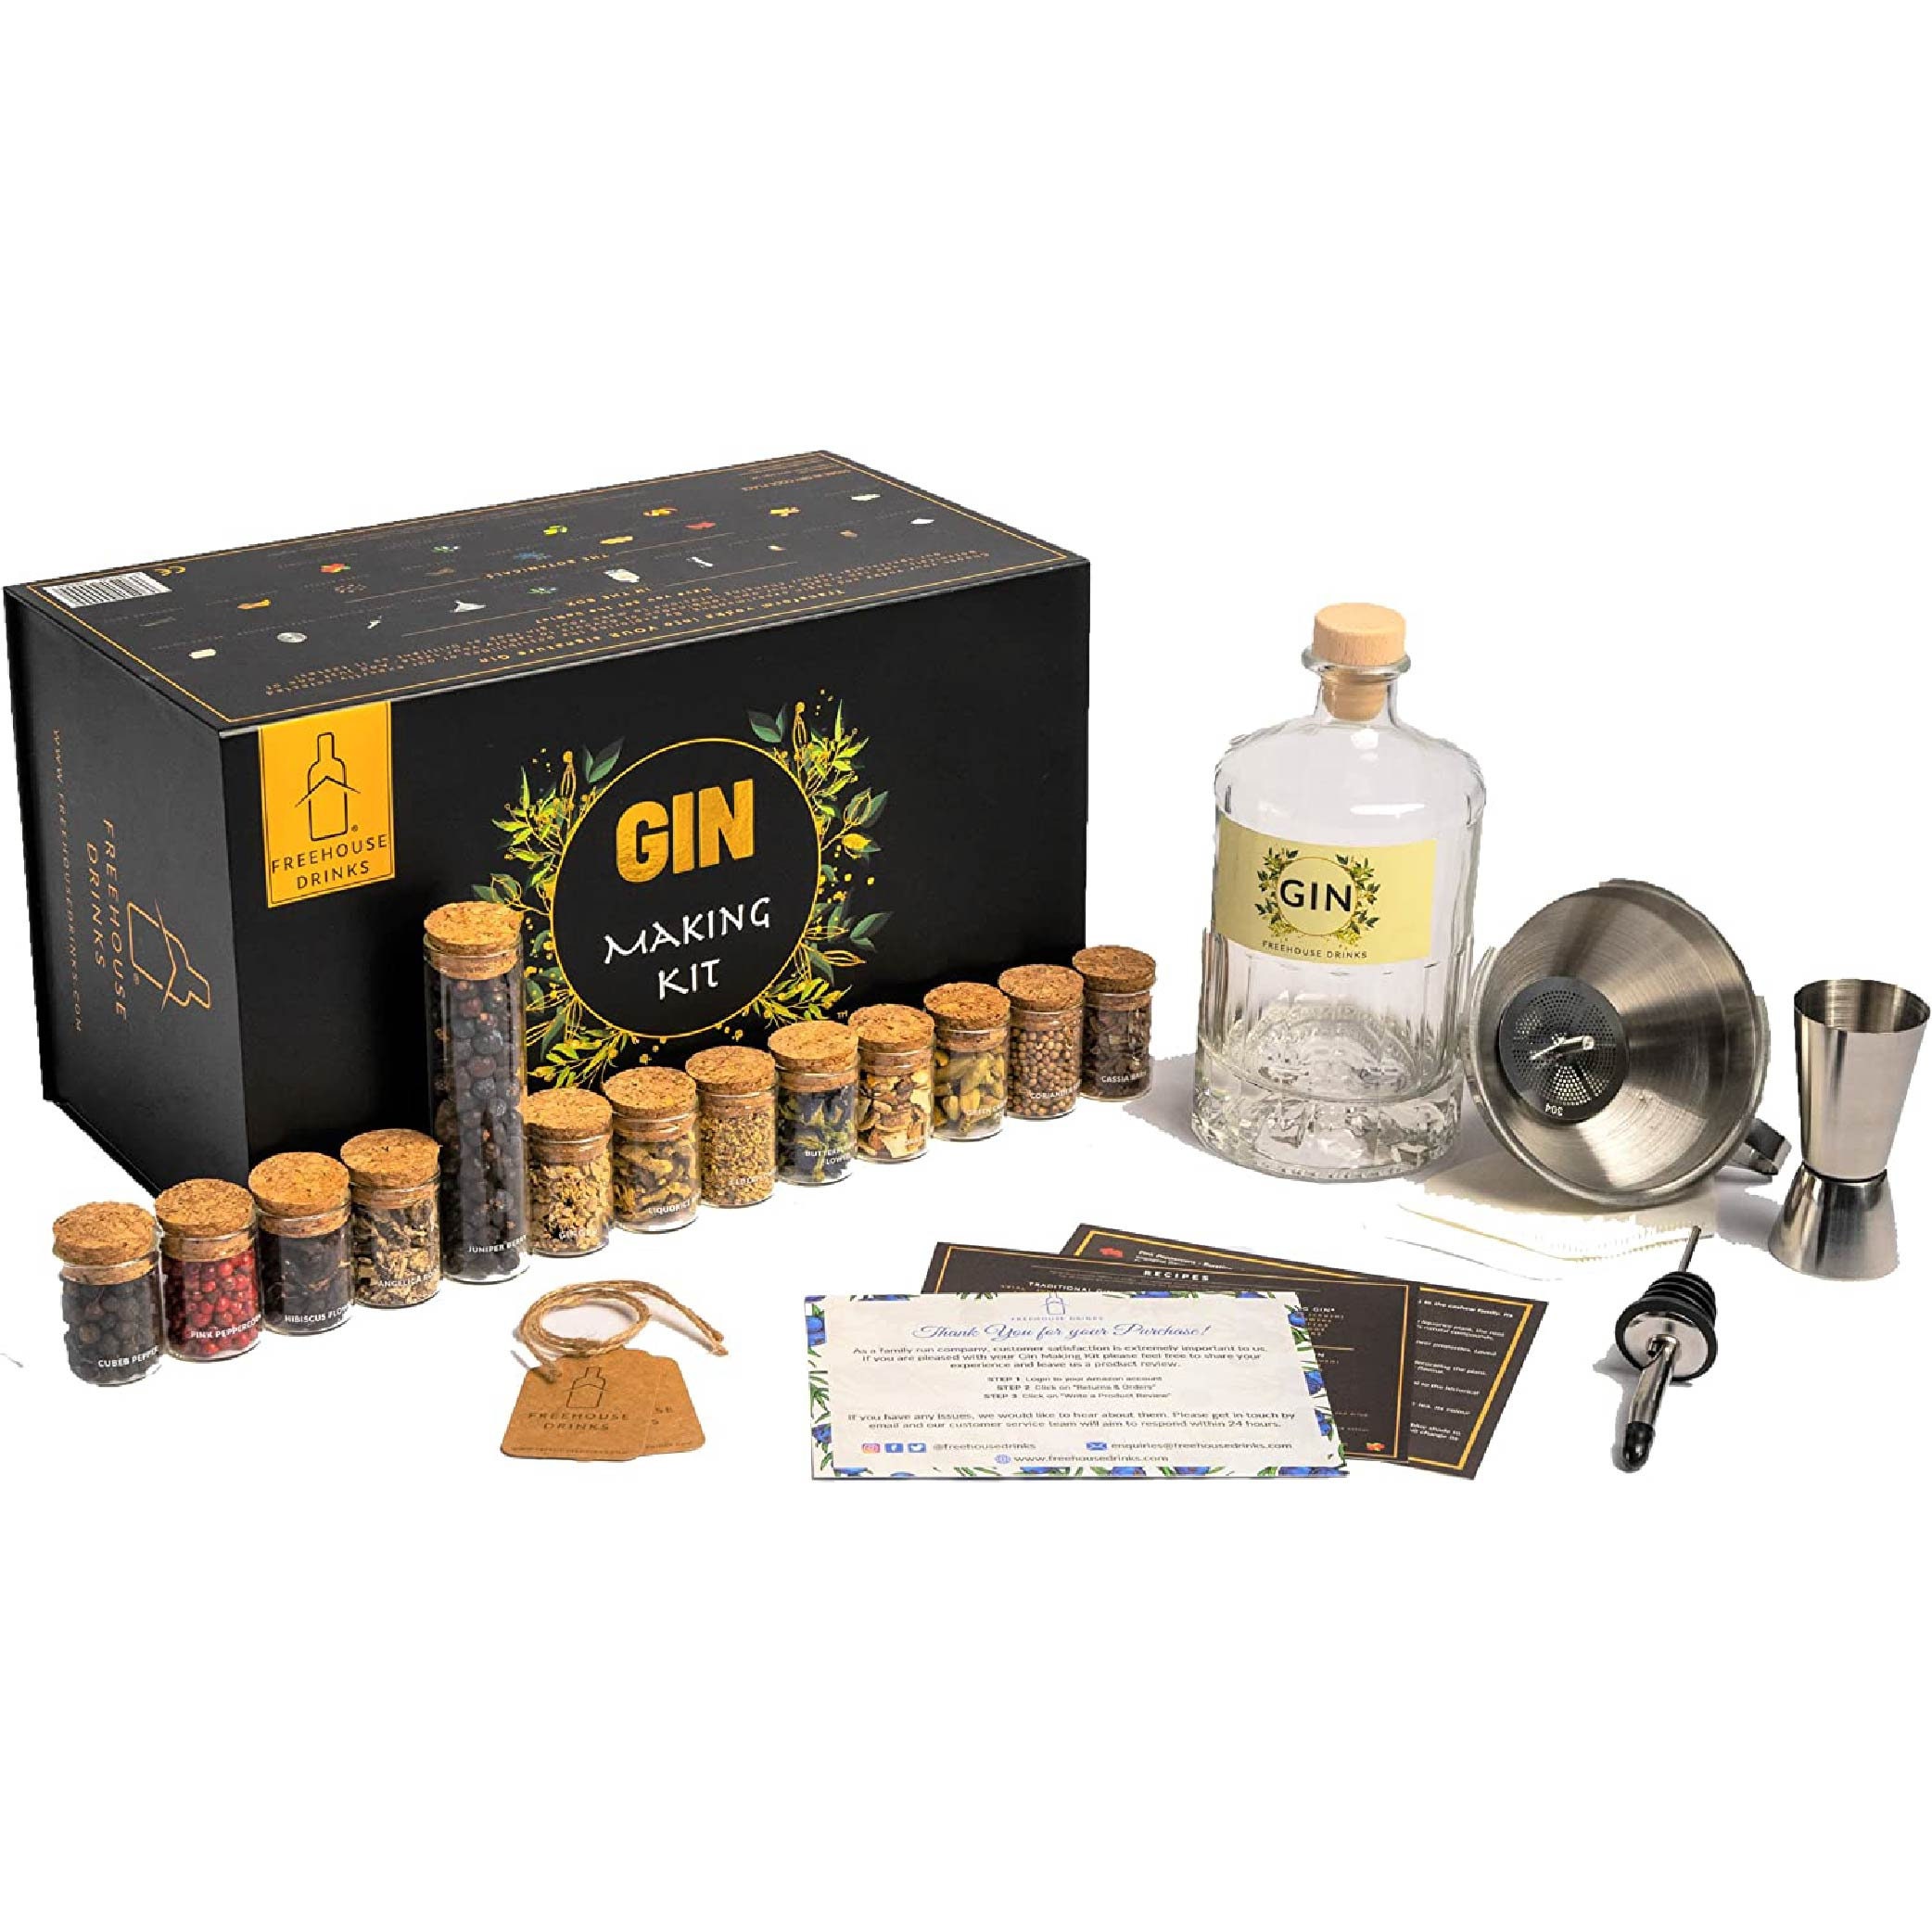 DO YOUR RUM Rum Making Kit Diy Adult Gift Kits Cool Fathers Day